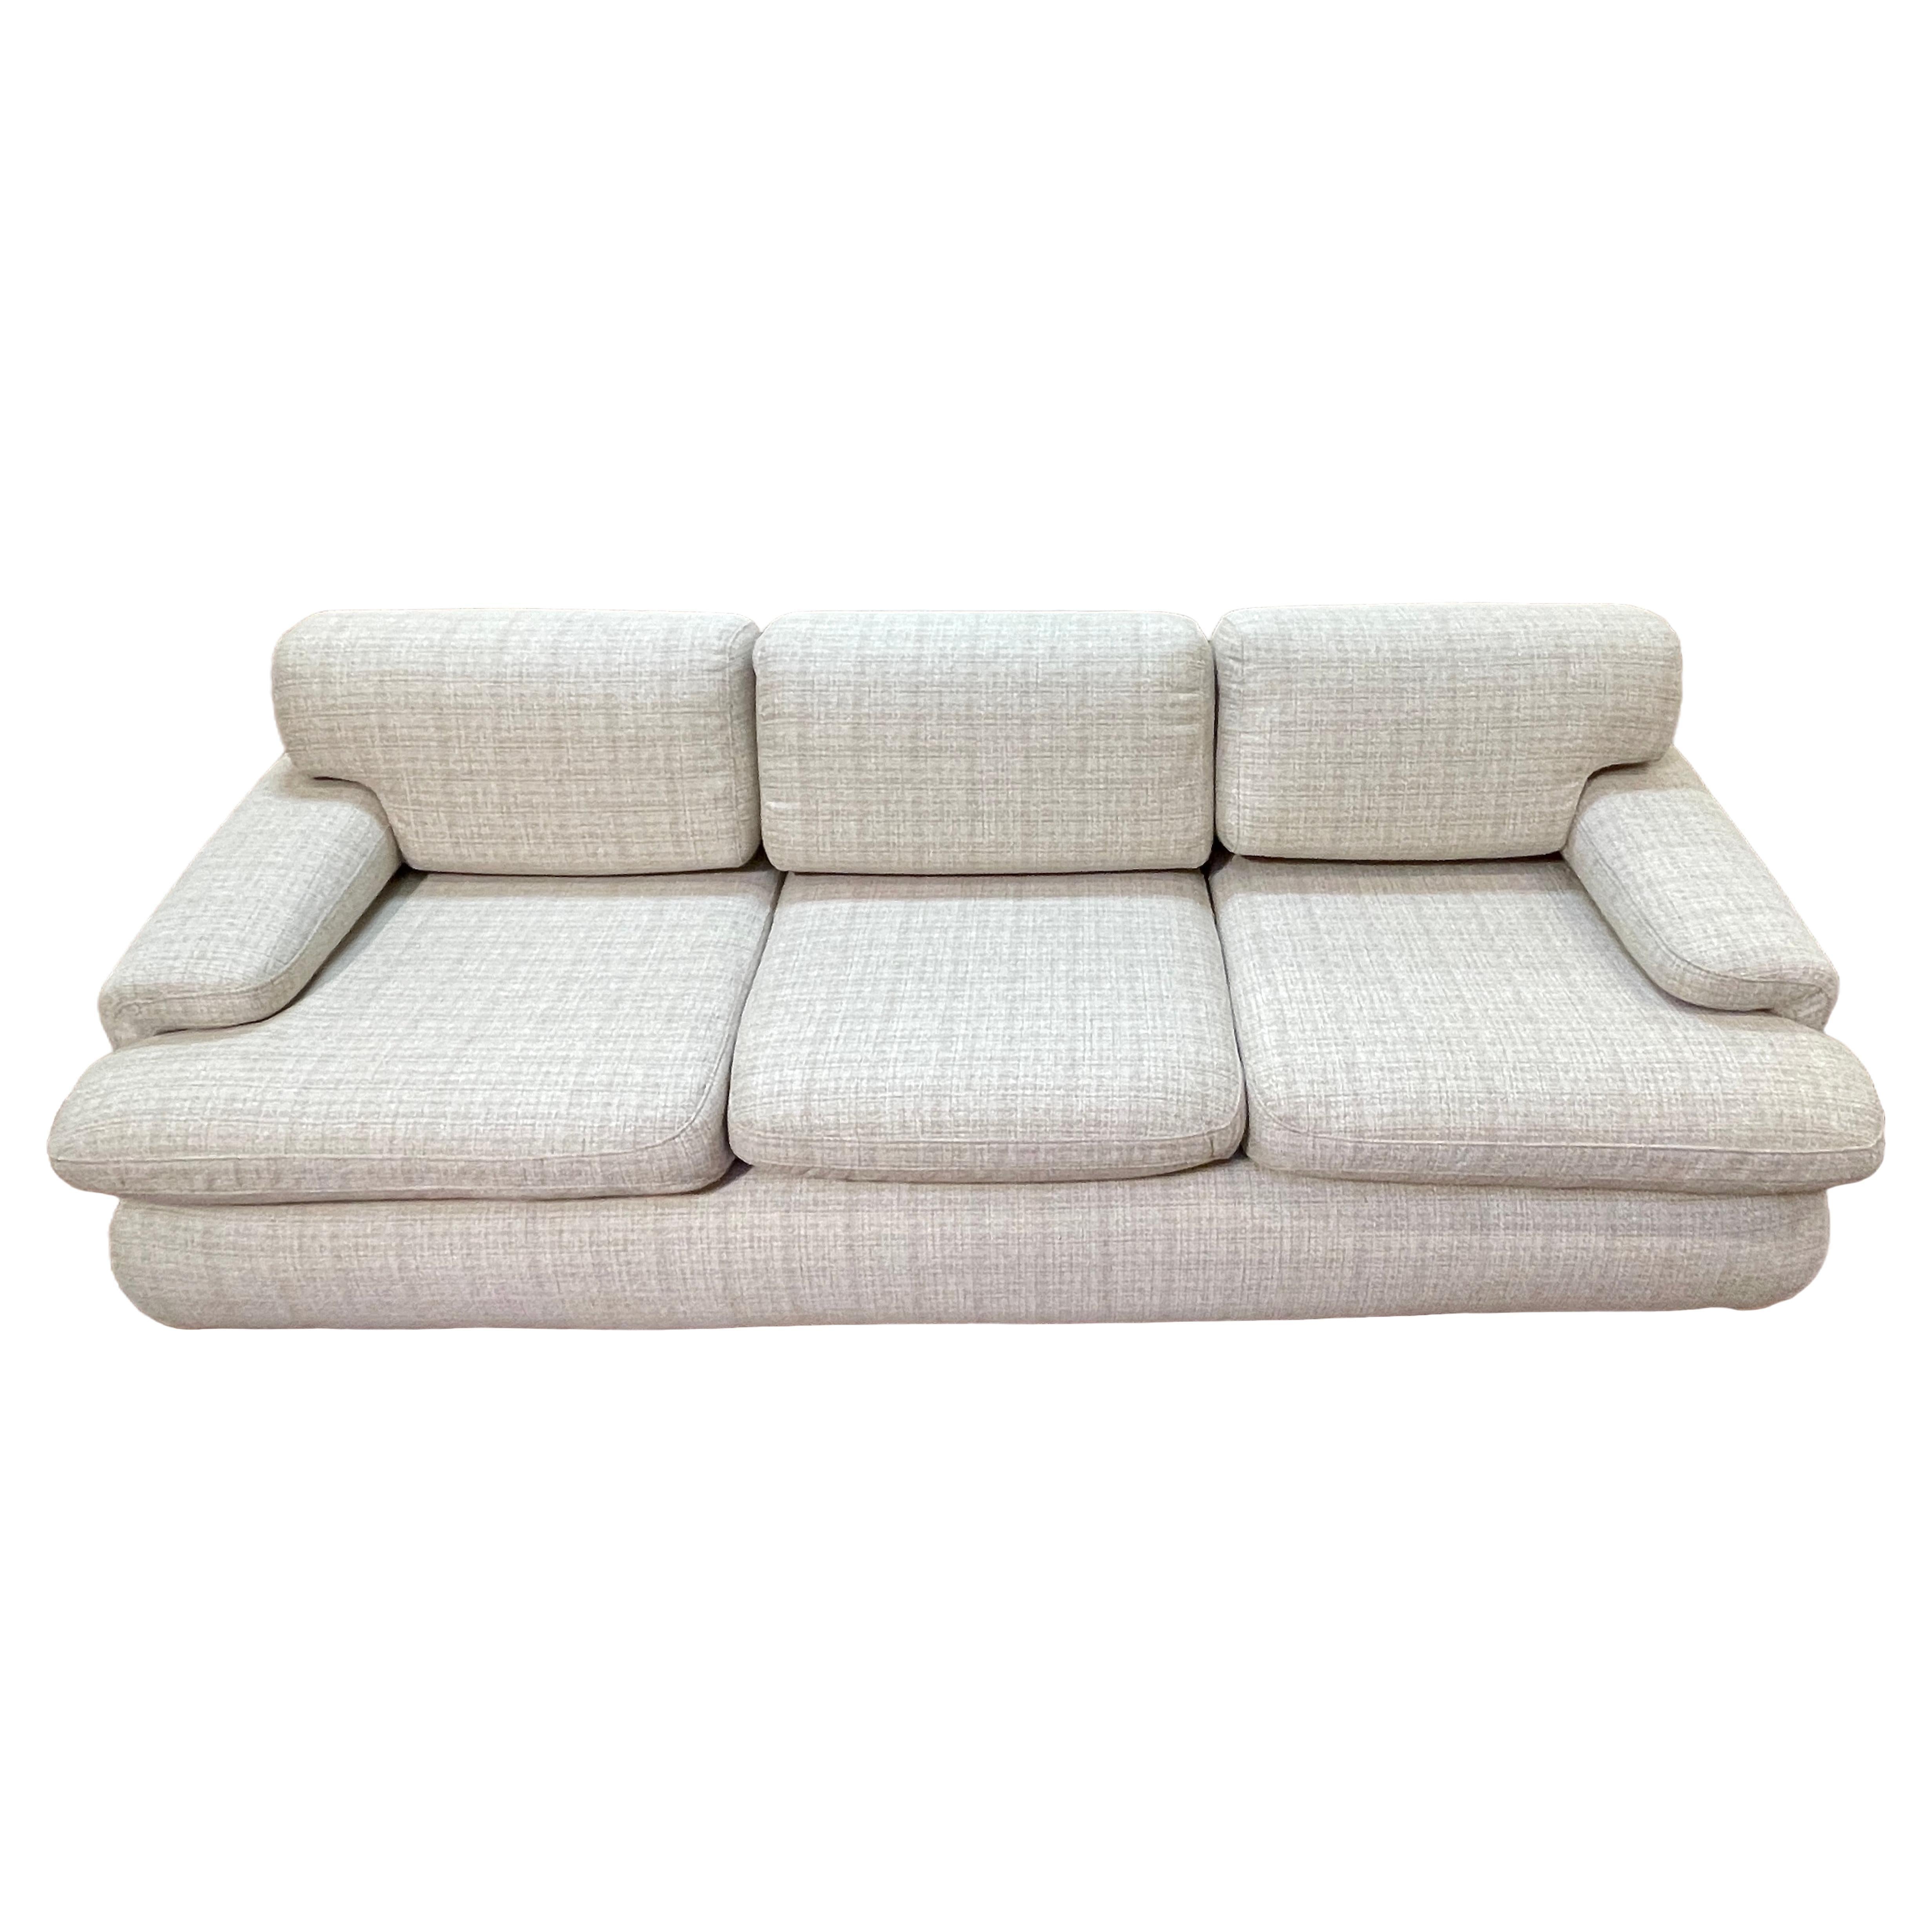 Vladimir Kagan by Preview 3 Piece Attached 'Sectional' Sofa
USA, Circa 1980's

A quietly luxurious Vladimir Kagan for Preview 3 piece attached 'sectional' sofa from the 1980s, highlighting the Vladimir Kagan iconic biomorphic style that defines the